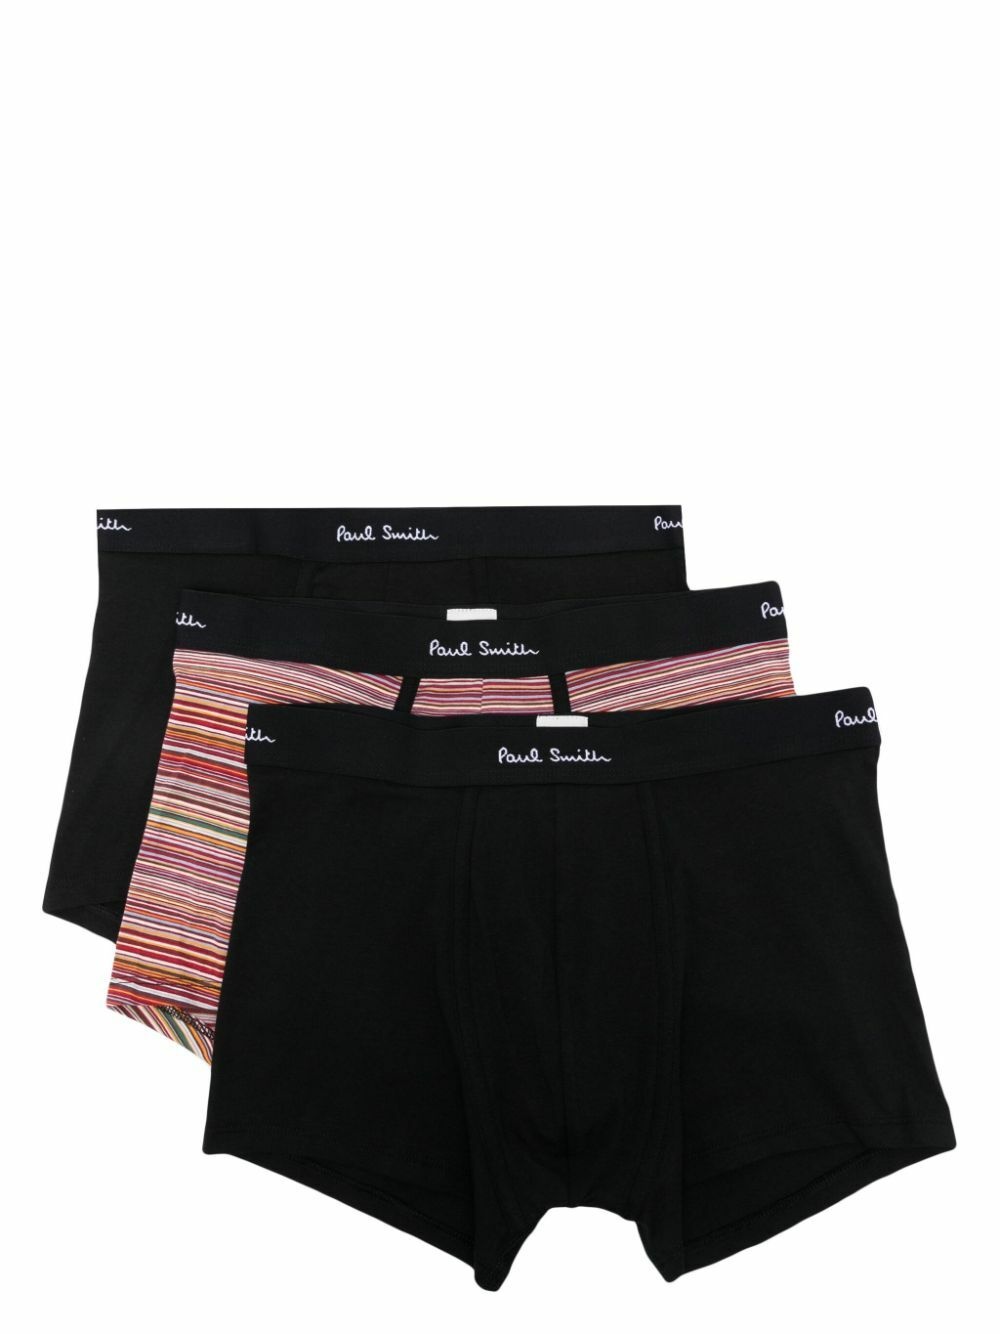 Photo: PAUL SMITH - Signature Mixed Boxer Briefs - Three Pack